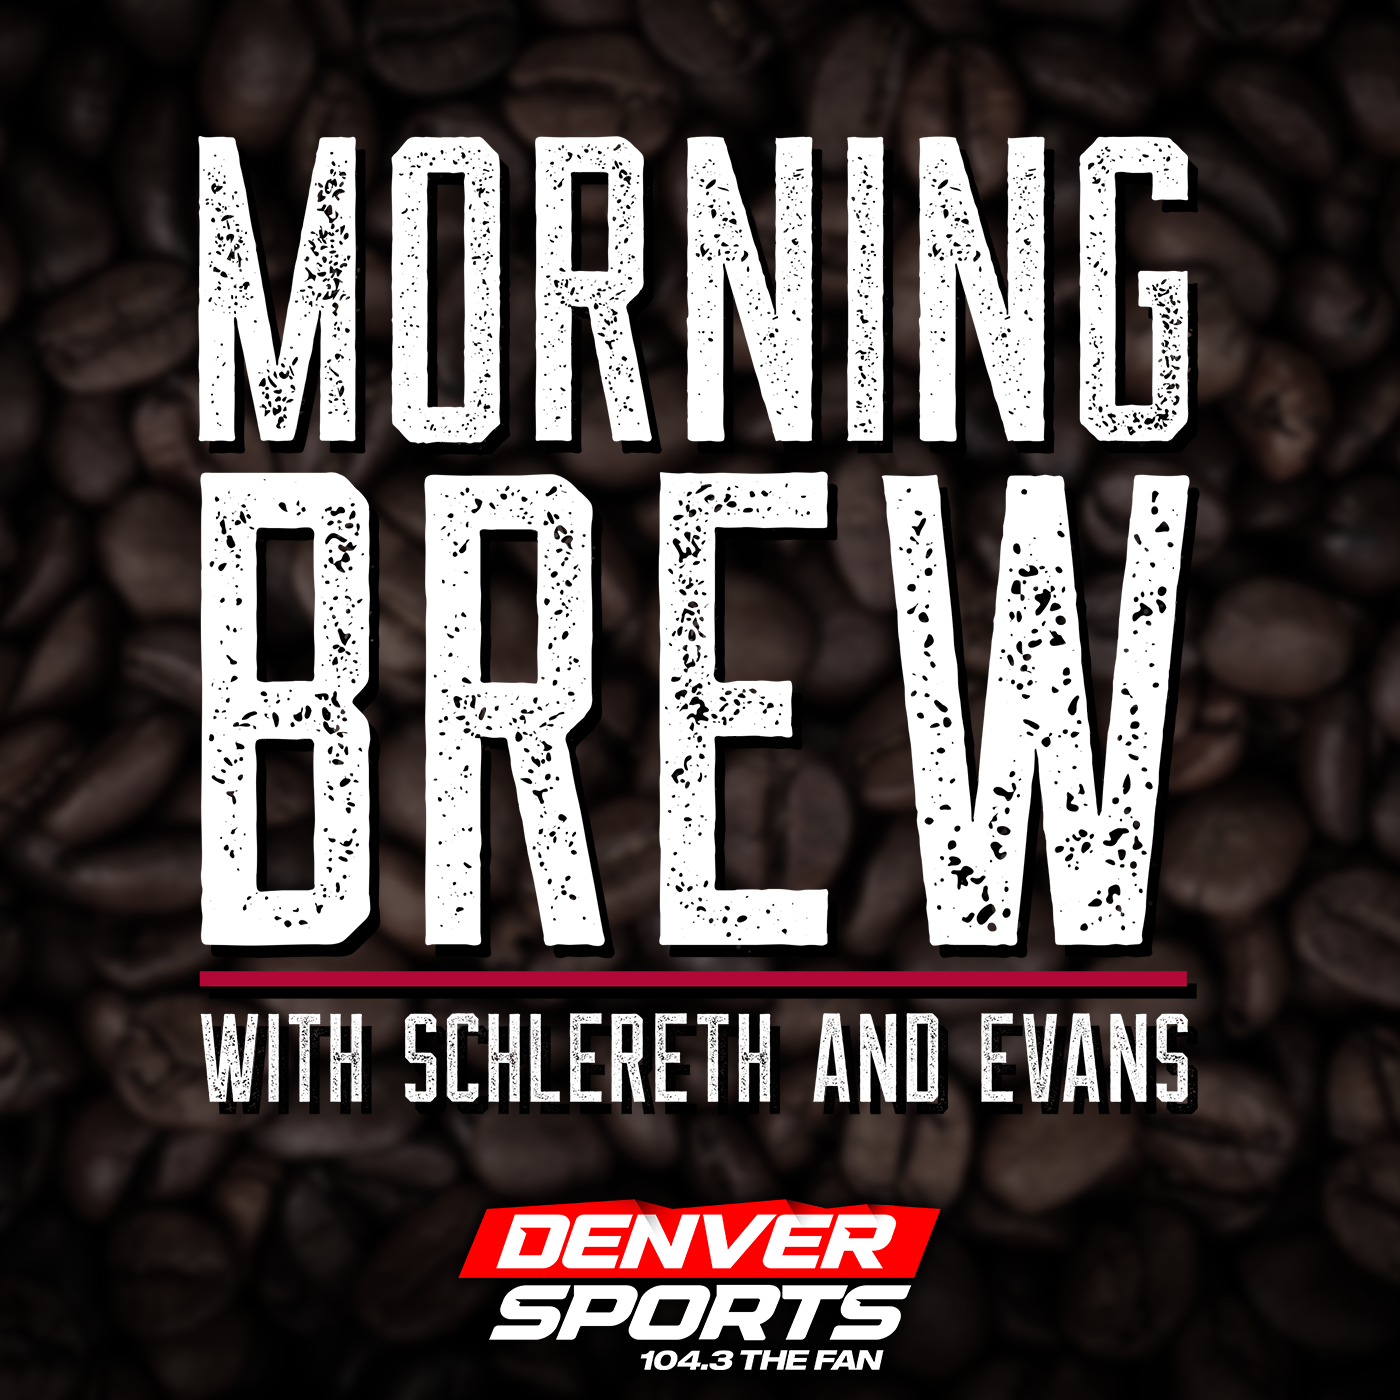 Morning Brew: Broncos injuries, Dalton is out, DT shines for Texans